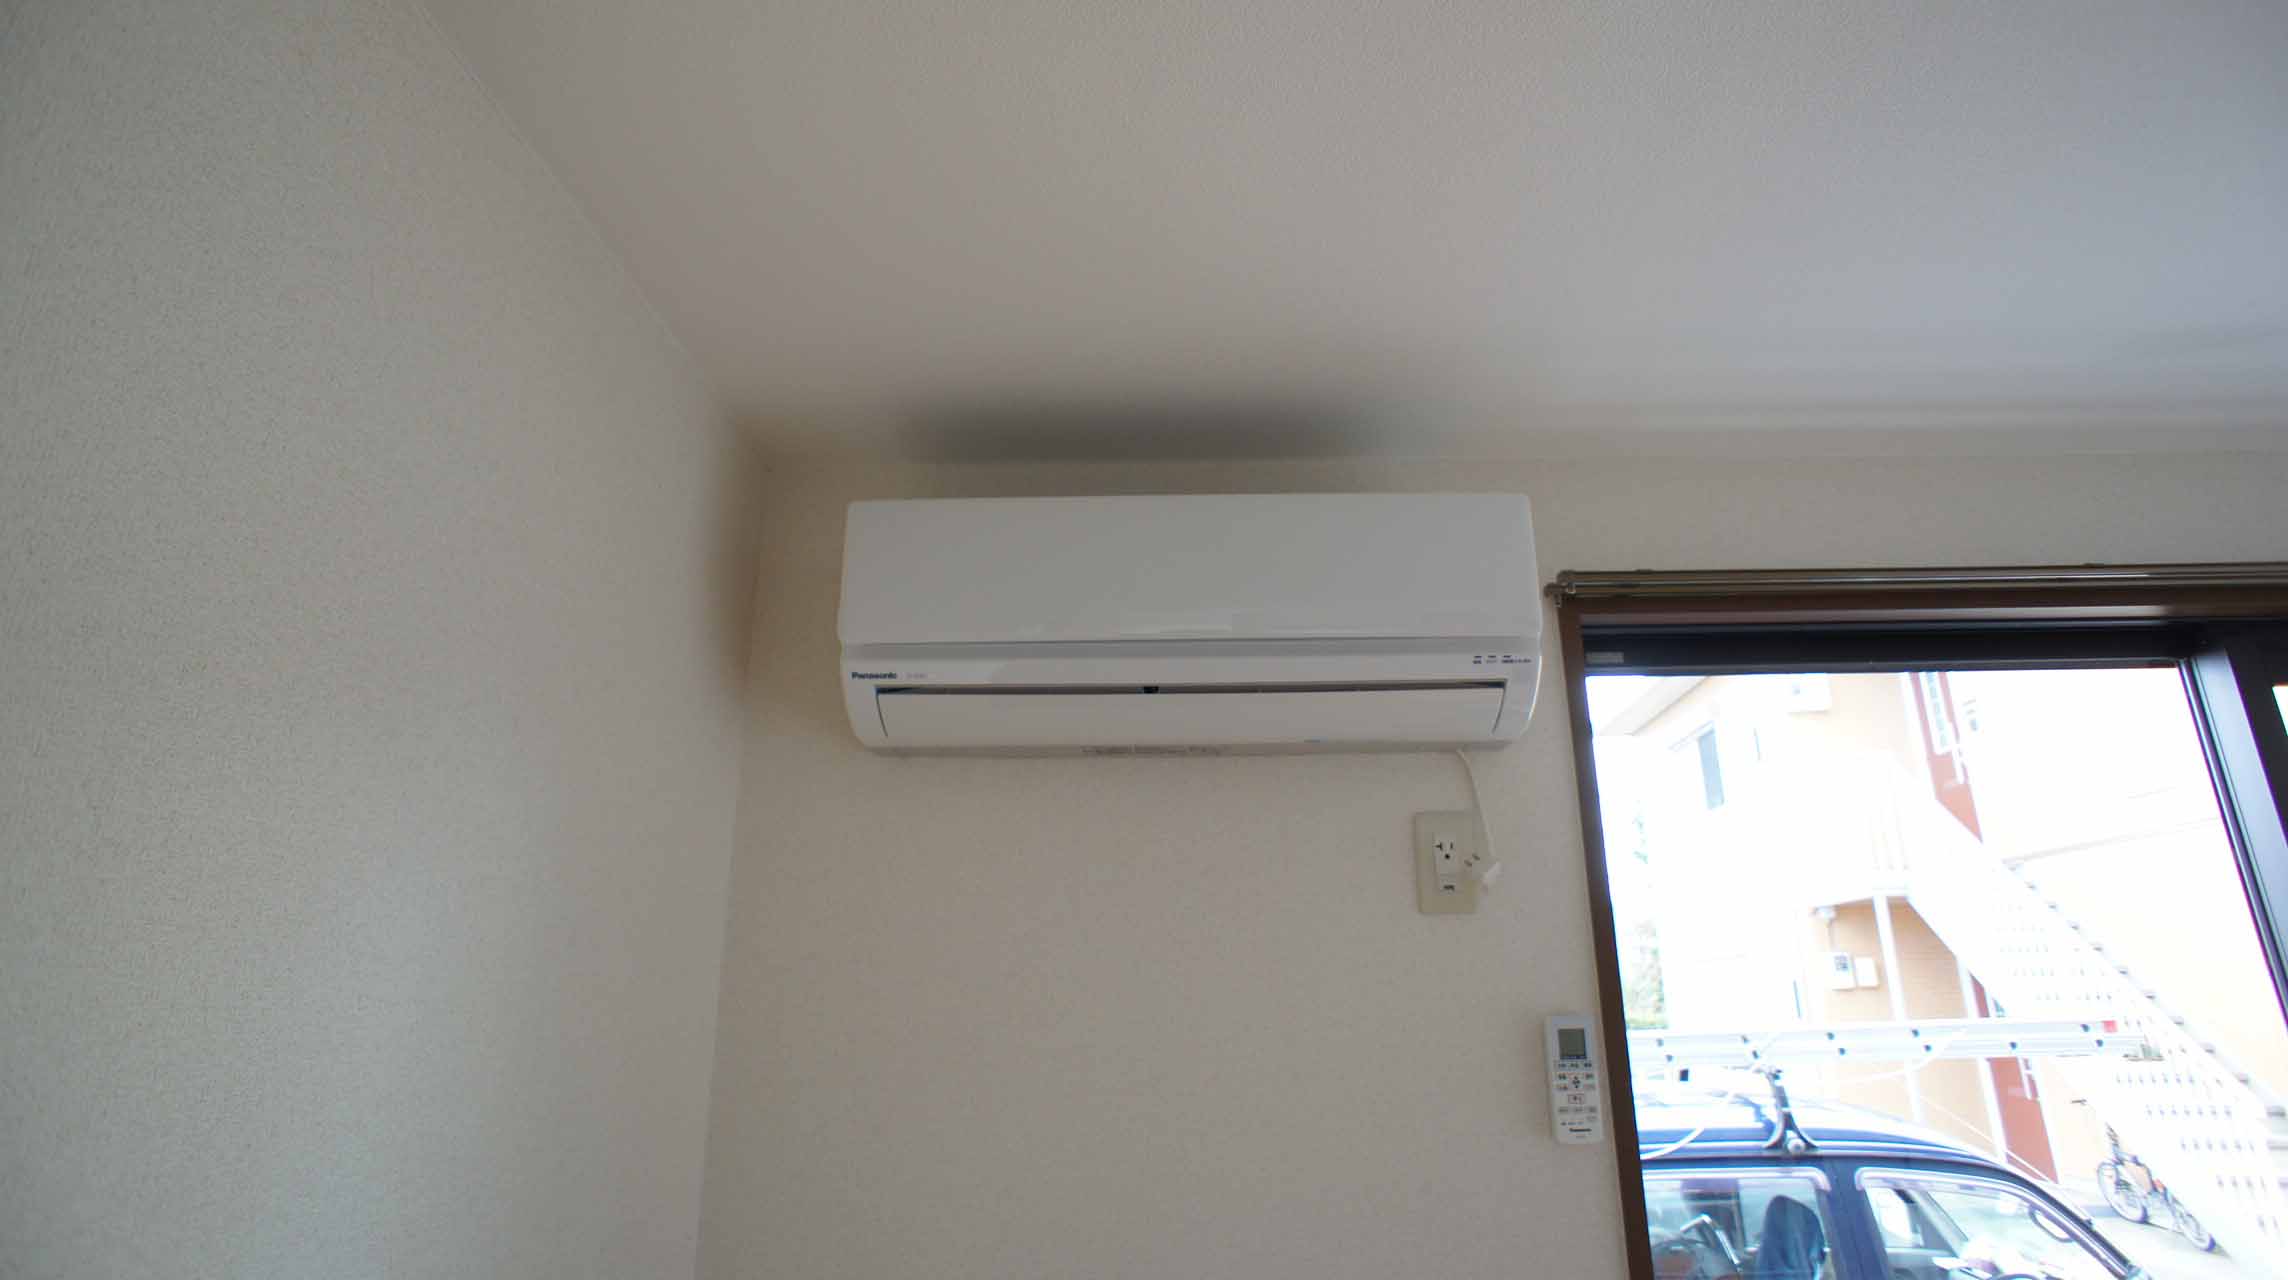 Other Equipment. Living air conditioning